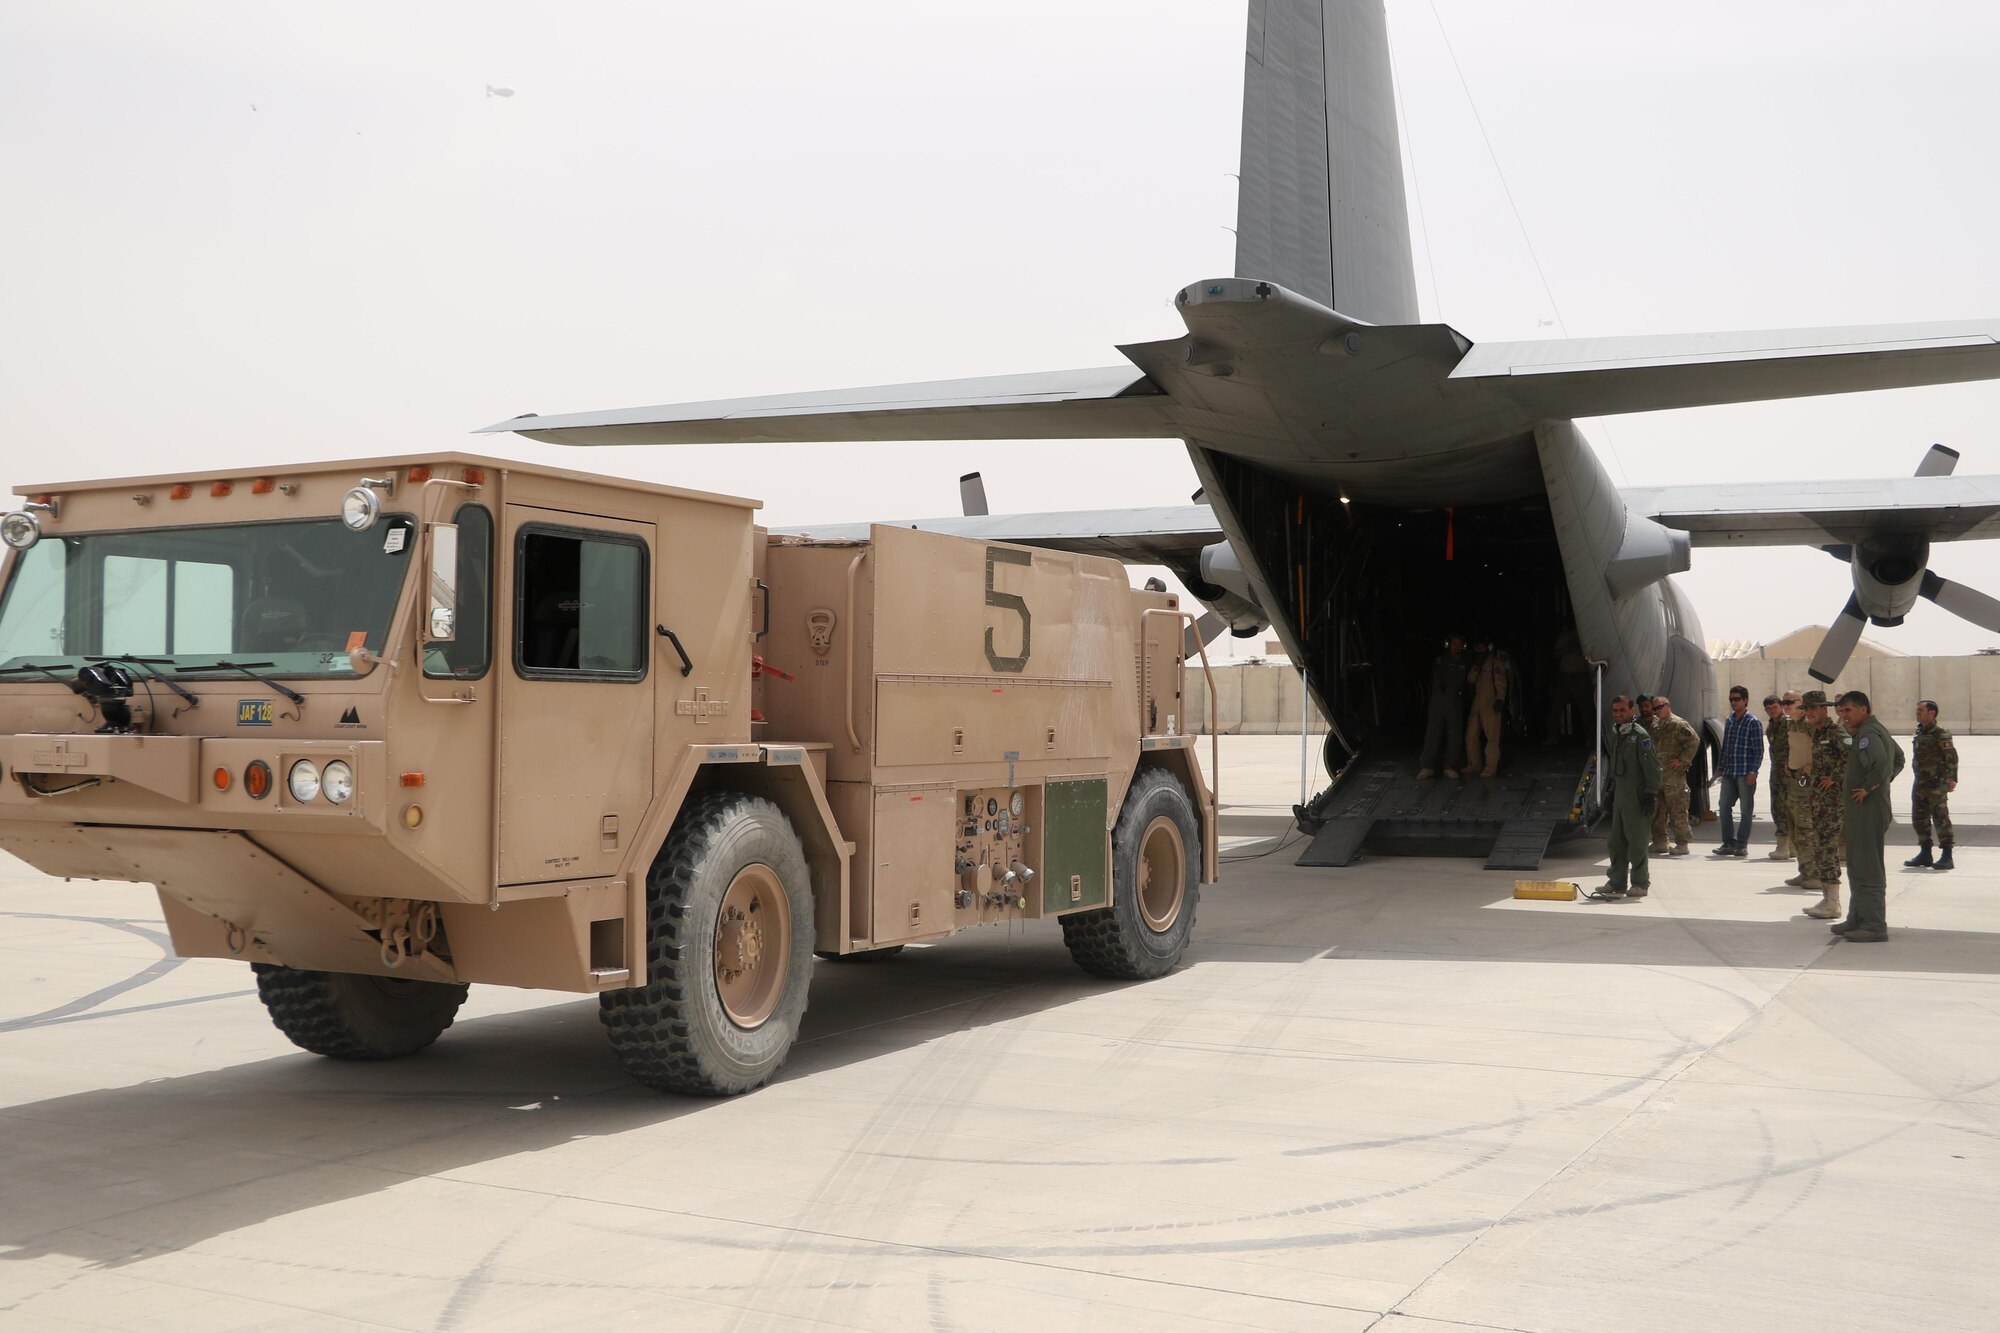 Afghan Air Force loadmasters along with Train, Advise, Assist Command - Air advisers safely loaded a P-19 firetruck onto an Afghan Air Force C-130 at Kandahar Air Wing, May 6, 2015. The team transported the firetruck from Kandahar to Herat to meet a critical need and creating an organic firefighting capability at the new location. (Courtesy photo)